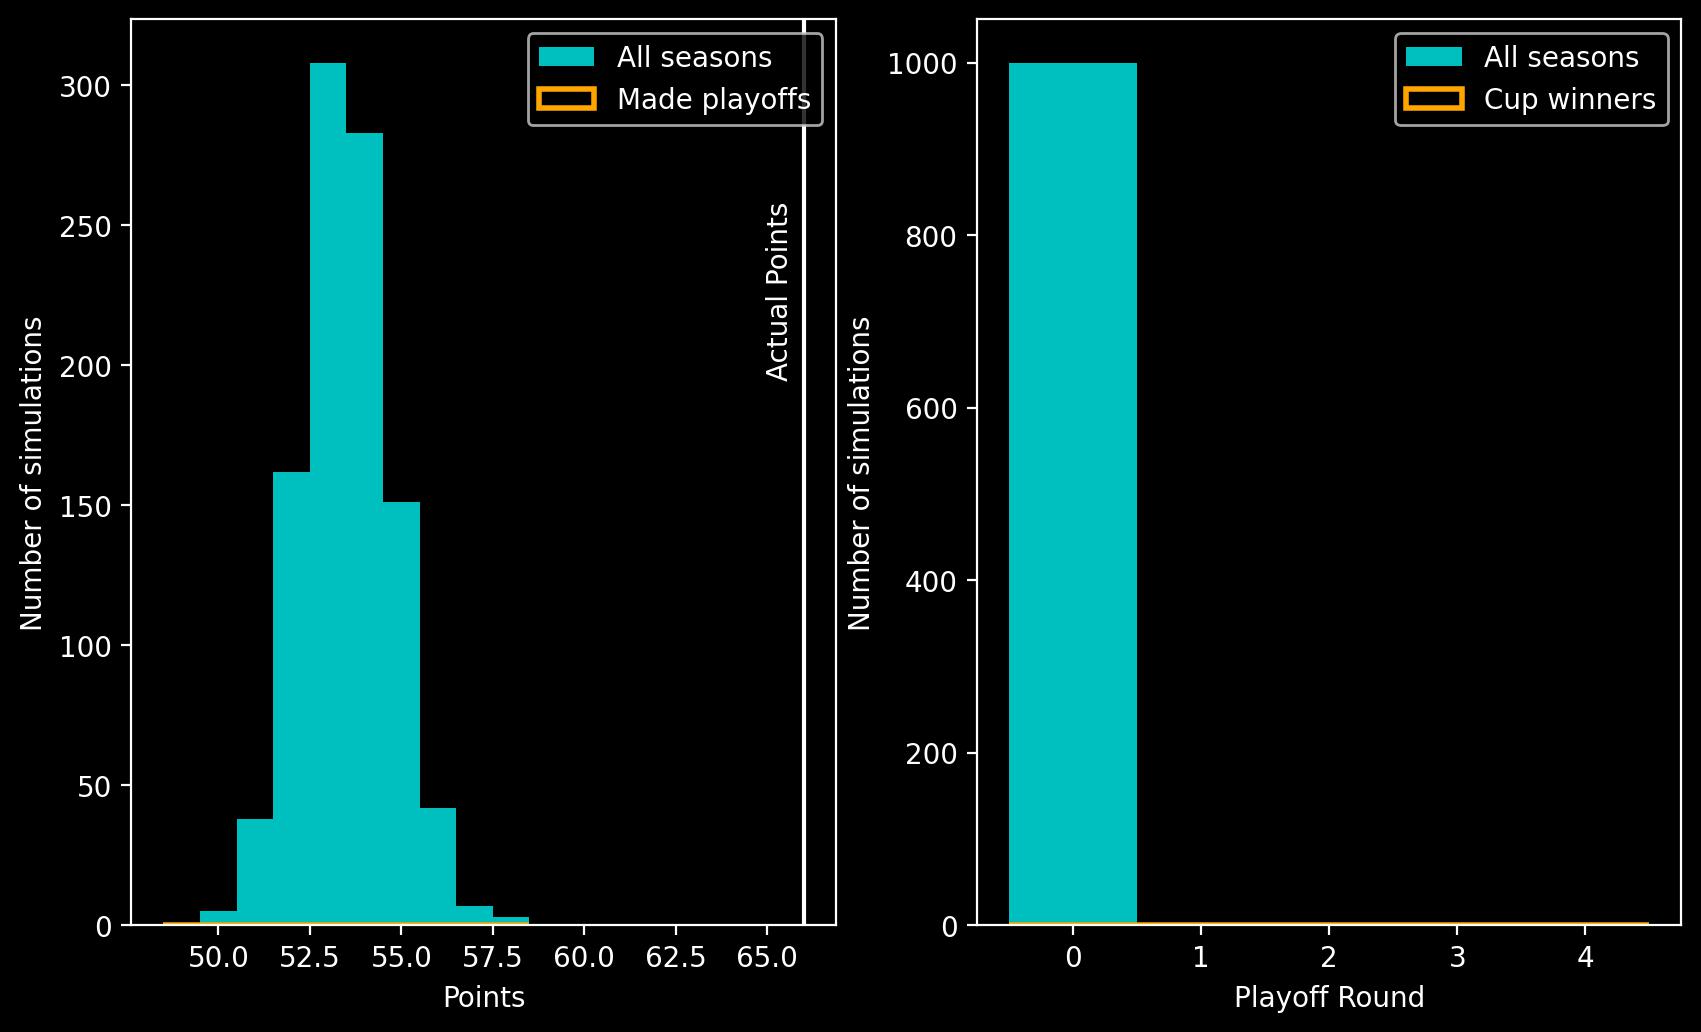 Two panel plot showing histograms. Left panel shows a histogram of points on the x-axis against number of simulations on the y-axis, the peak is at 53 points. Right panel shows playoff round on the x-axis against number of simulations on the y-axis. The largest bar is at playoff round 0.